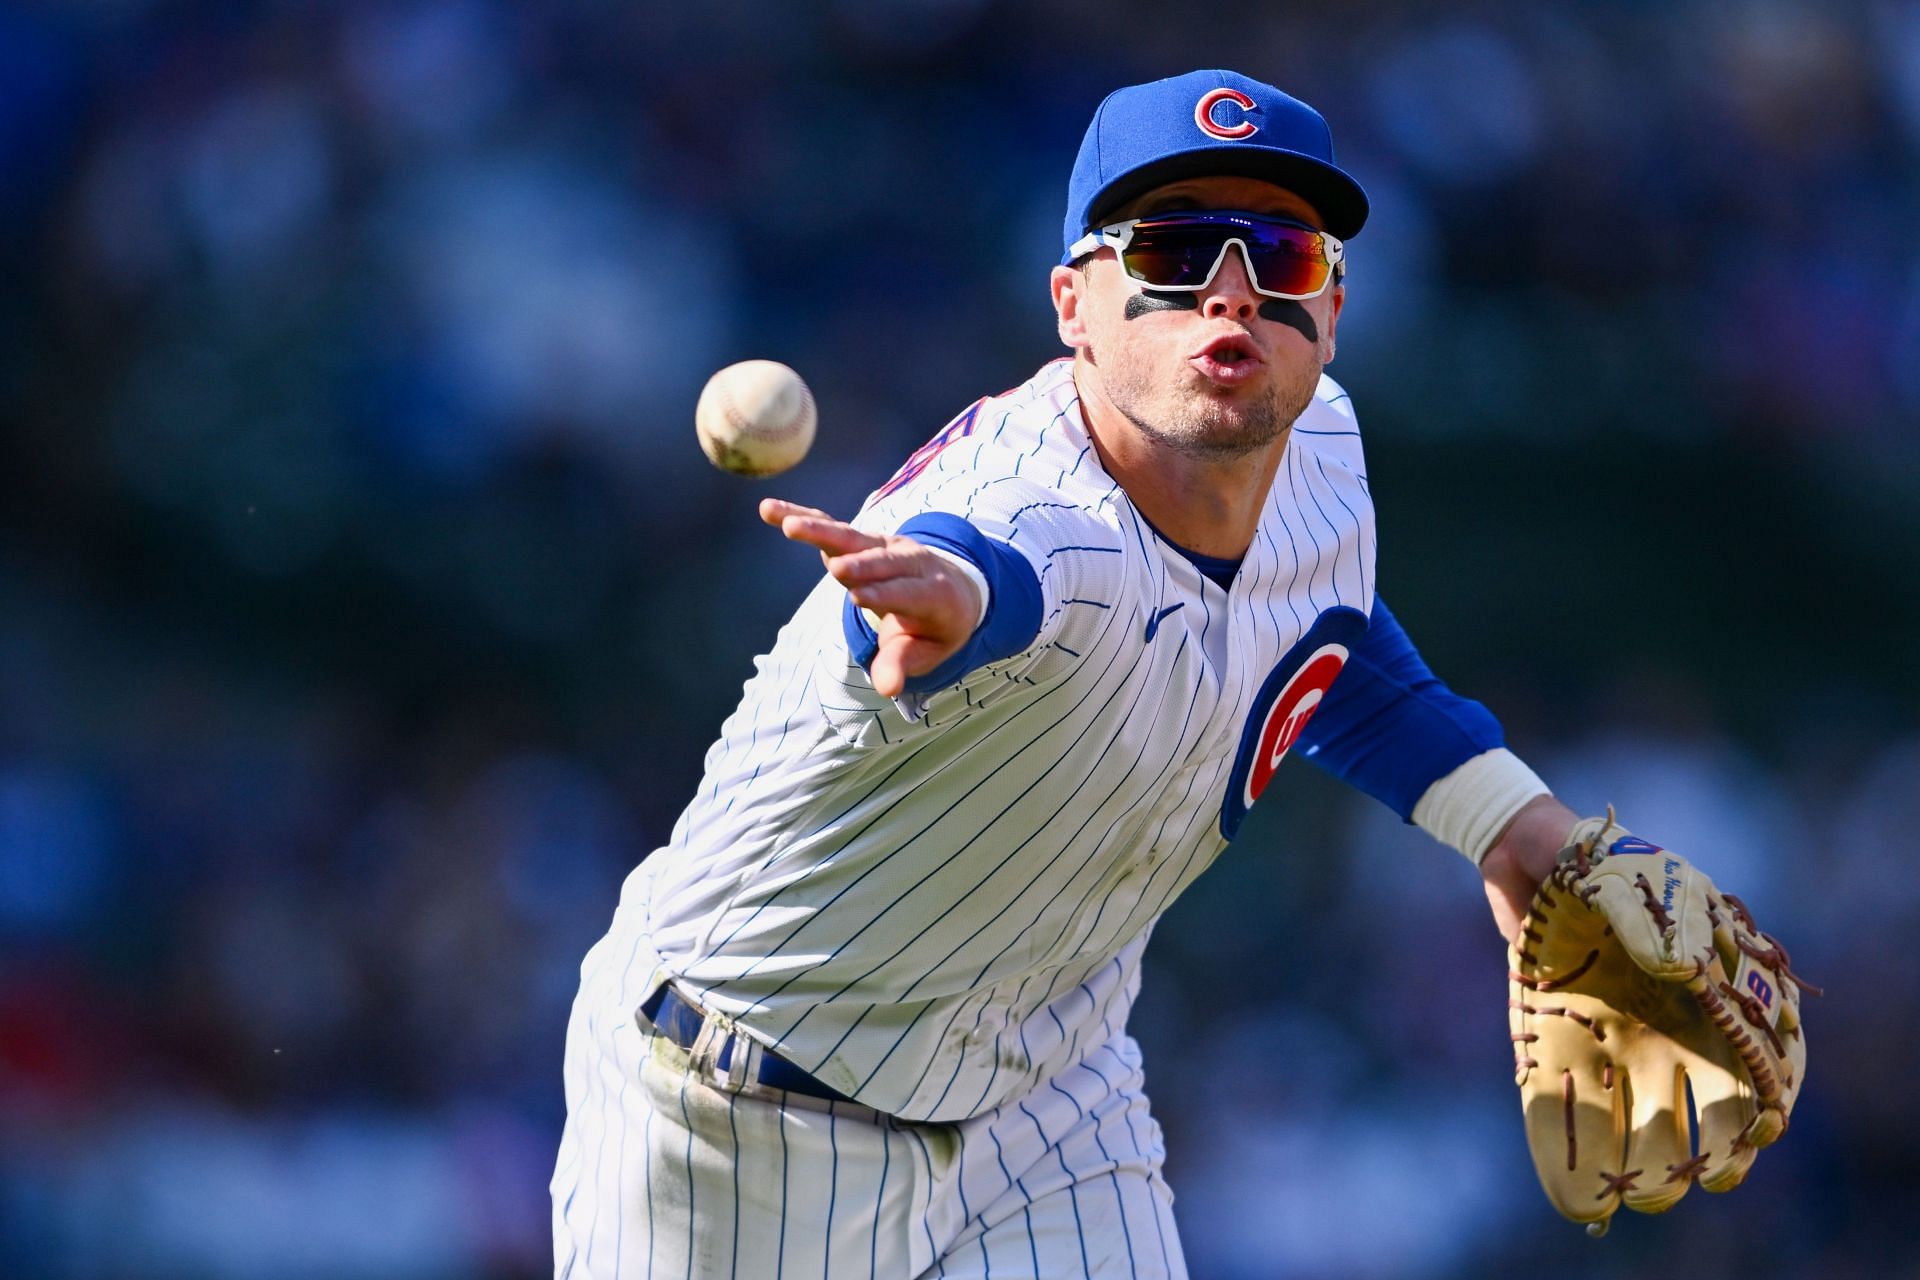 Chicago Cubs fans delighted as infielder Nico Hoerner delivers an extra